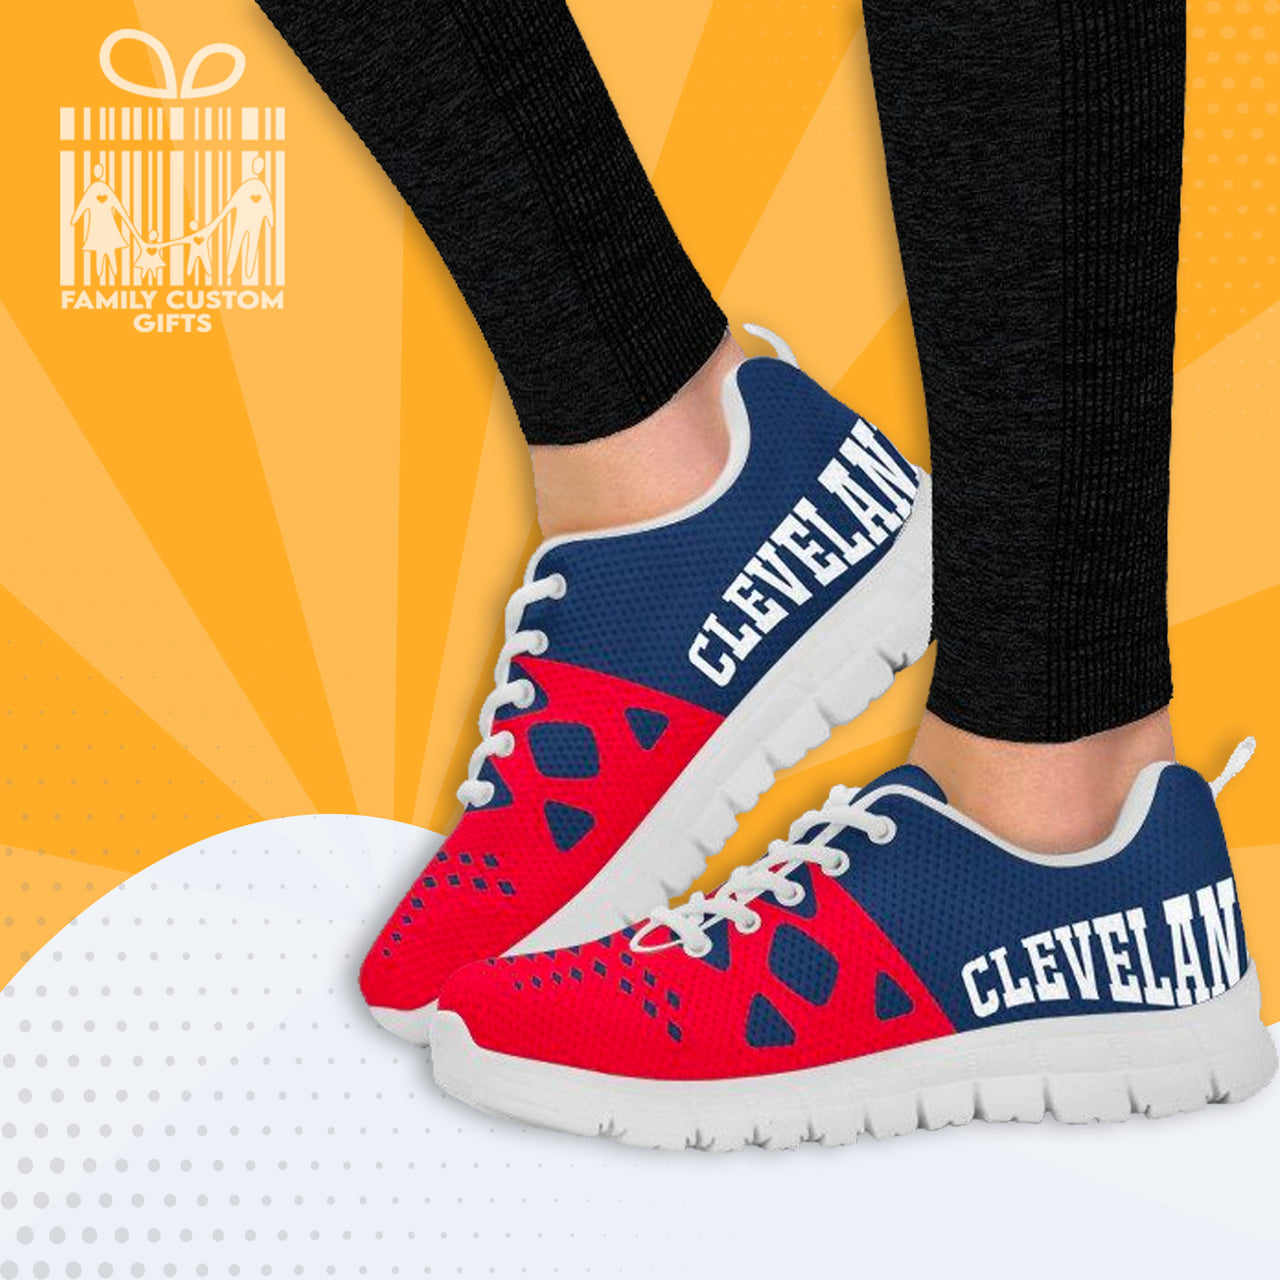 Cleveland Custom Shoes for Men Women 3D Print Fashion Sneaker Gifts for Her Him